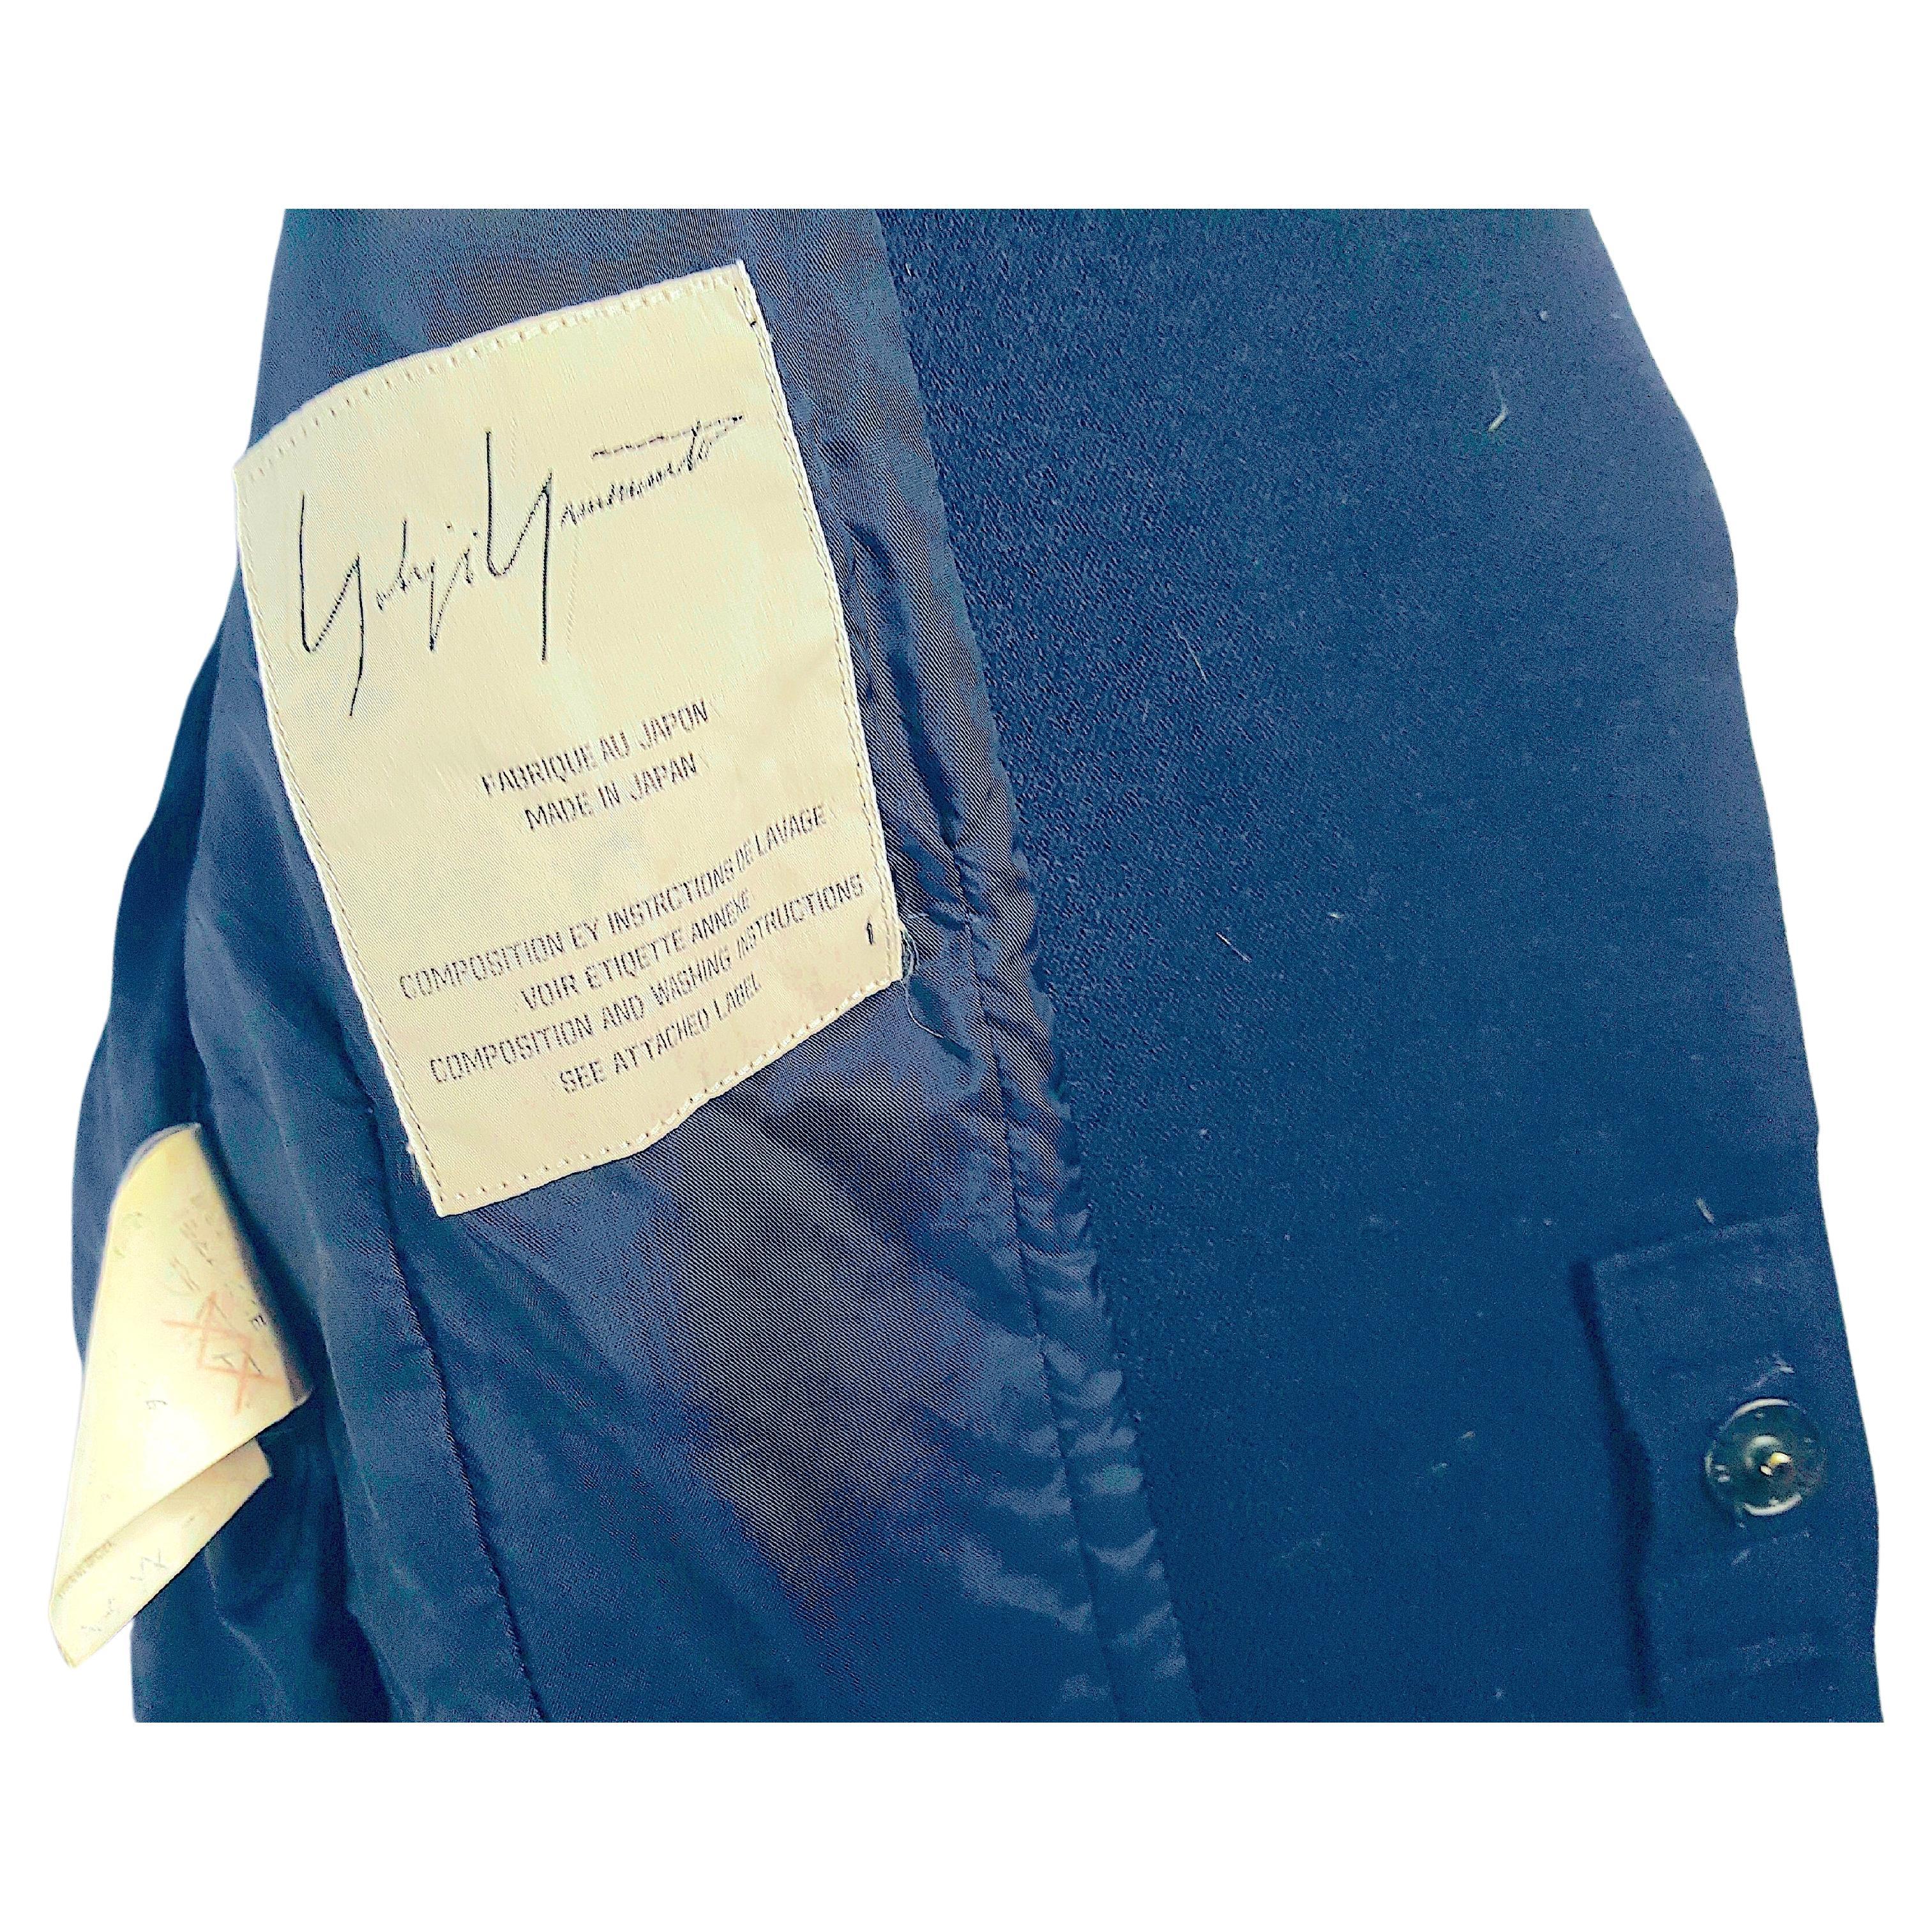 Yamamoto 1990s BiasCut NotchedLapelJacket & MaxiSkirt RibbonTrimmed NavyWoolSuit In Good Condition For Sale In Chicago, IL